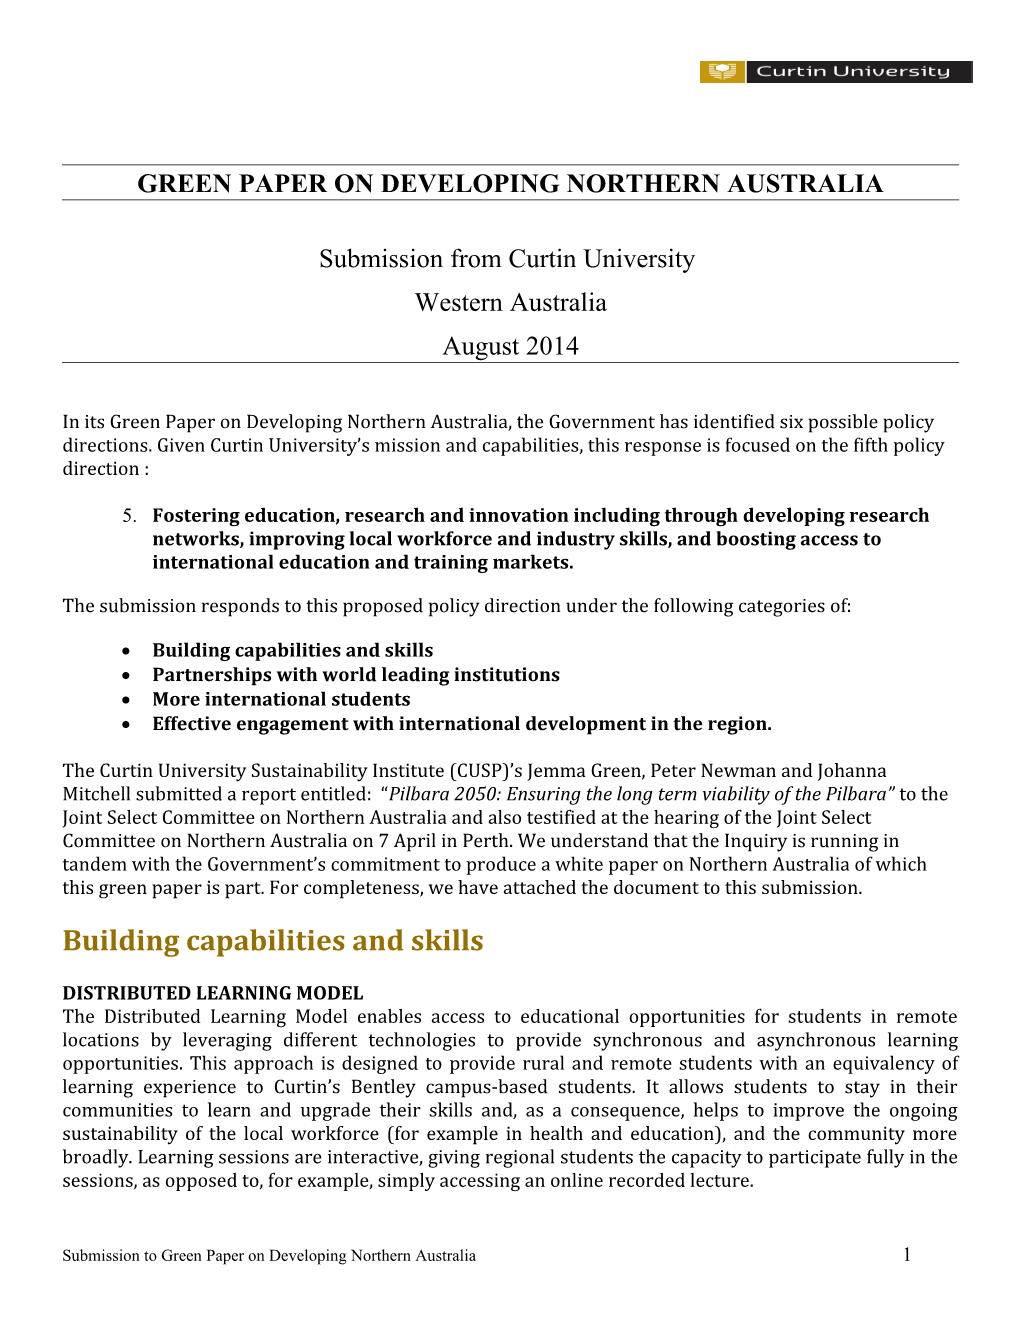 Green Paper on Developing Northern Australia